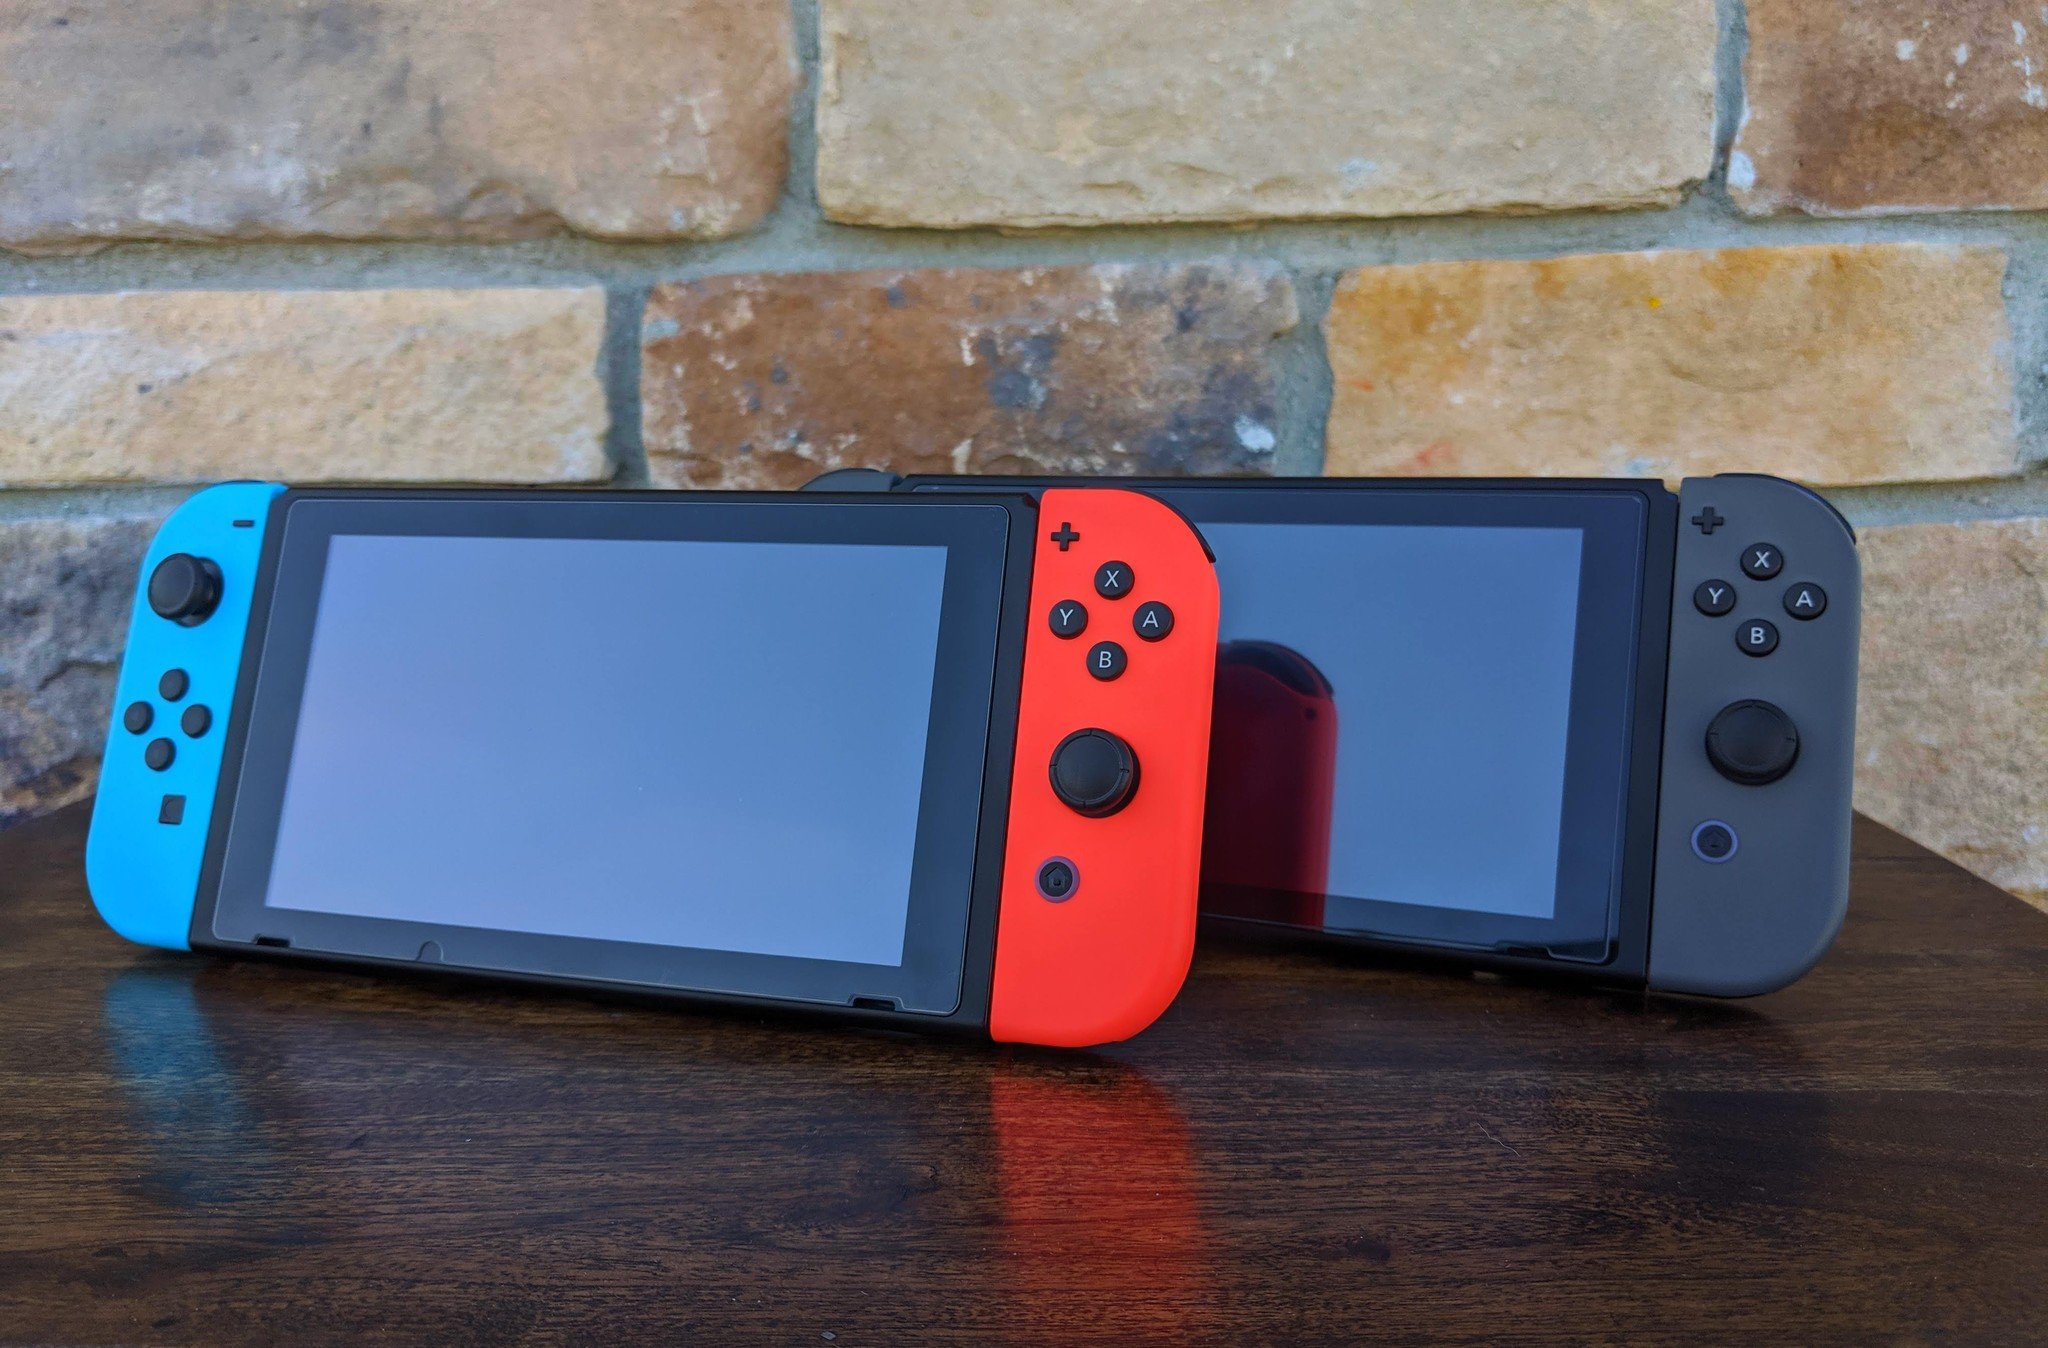 Two Nintendo Switch consoles